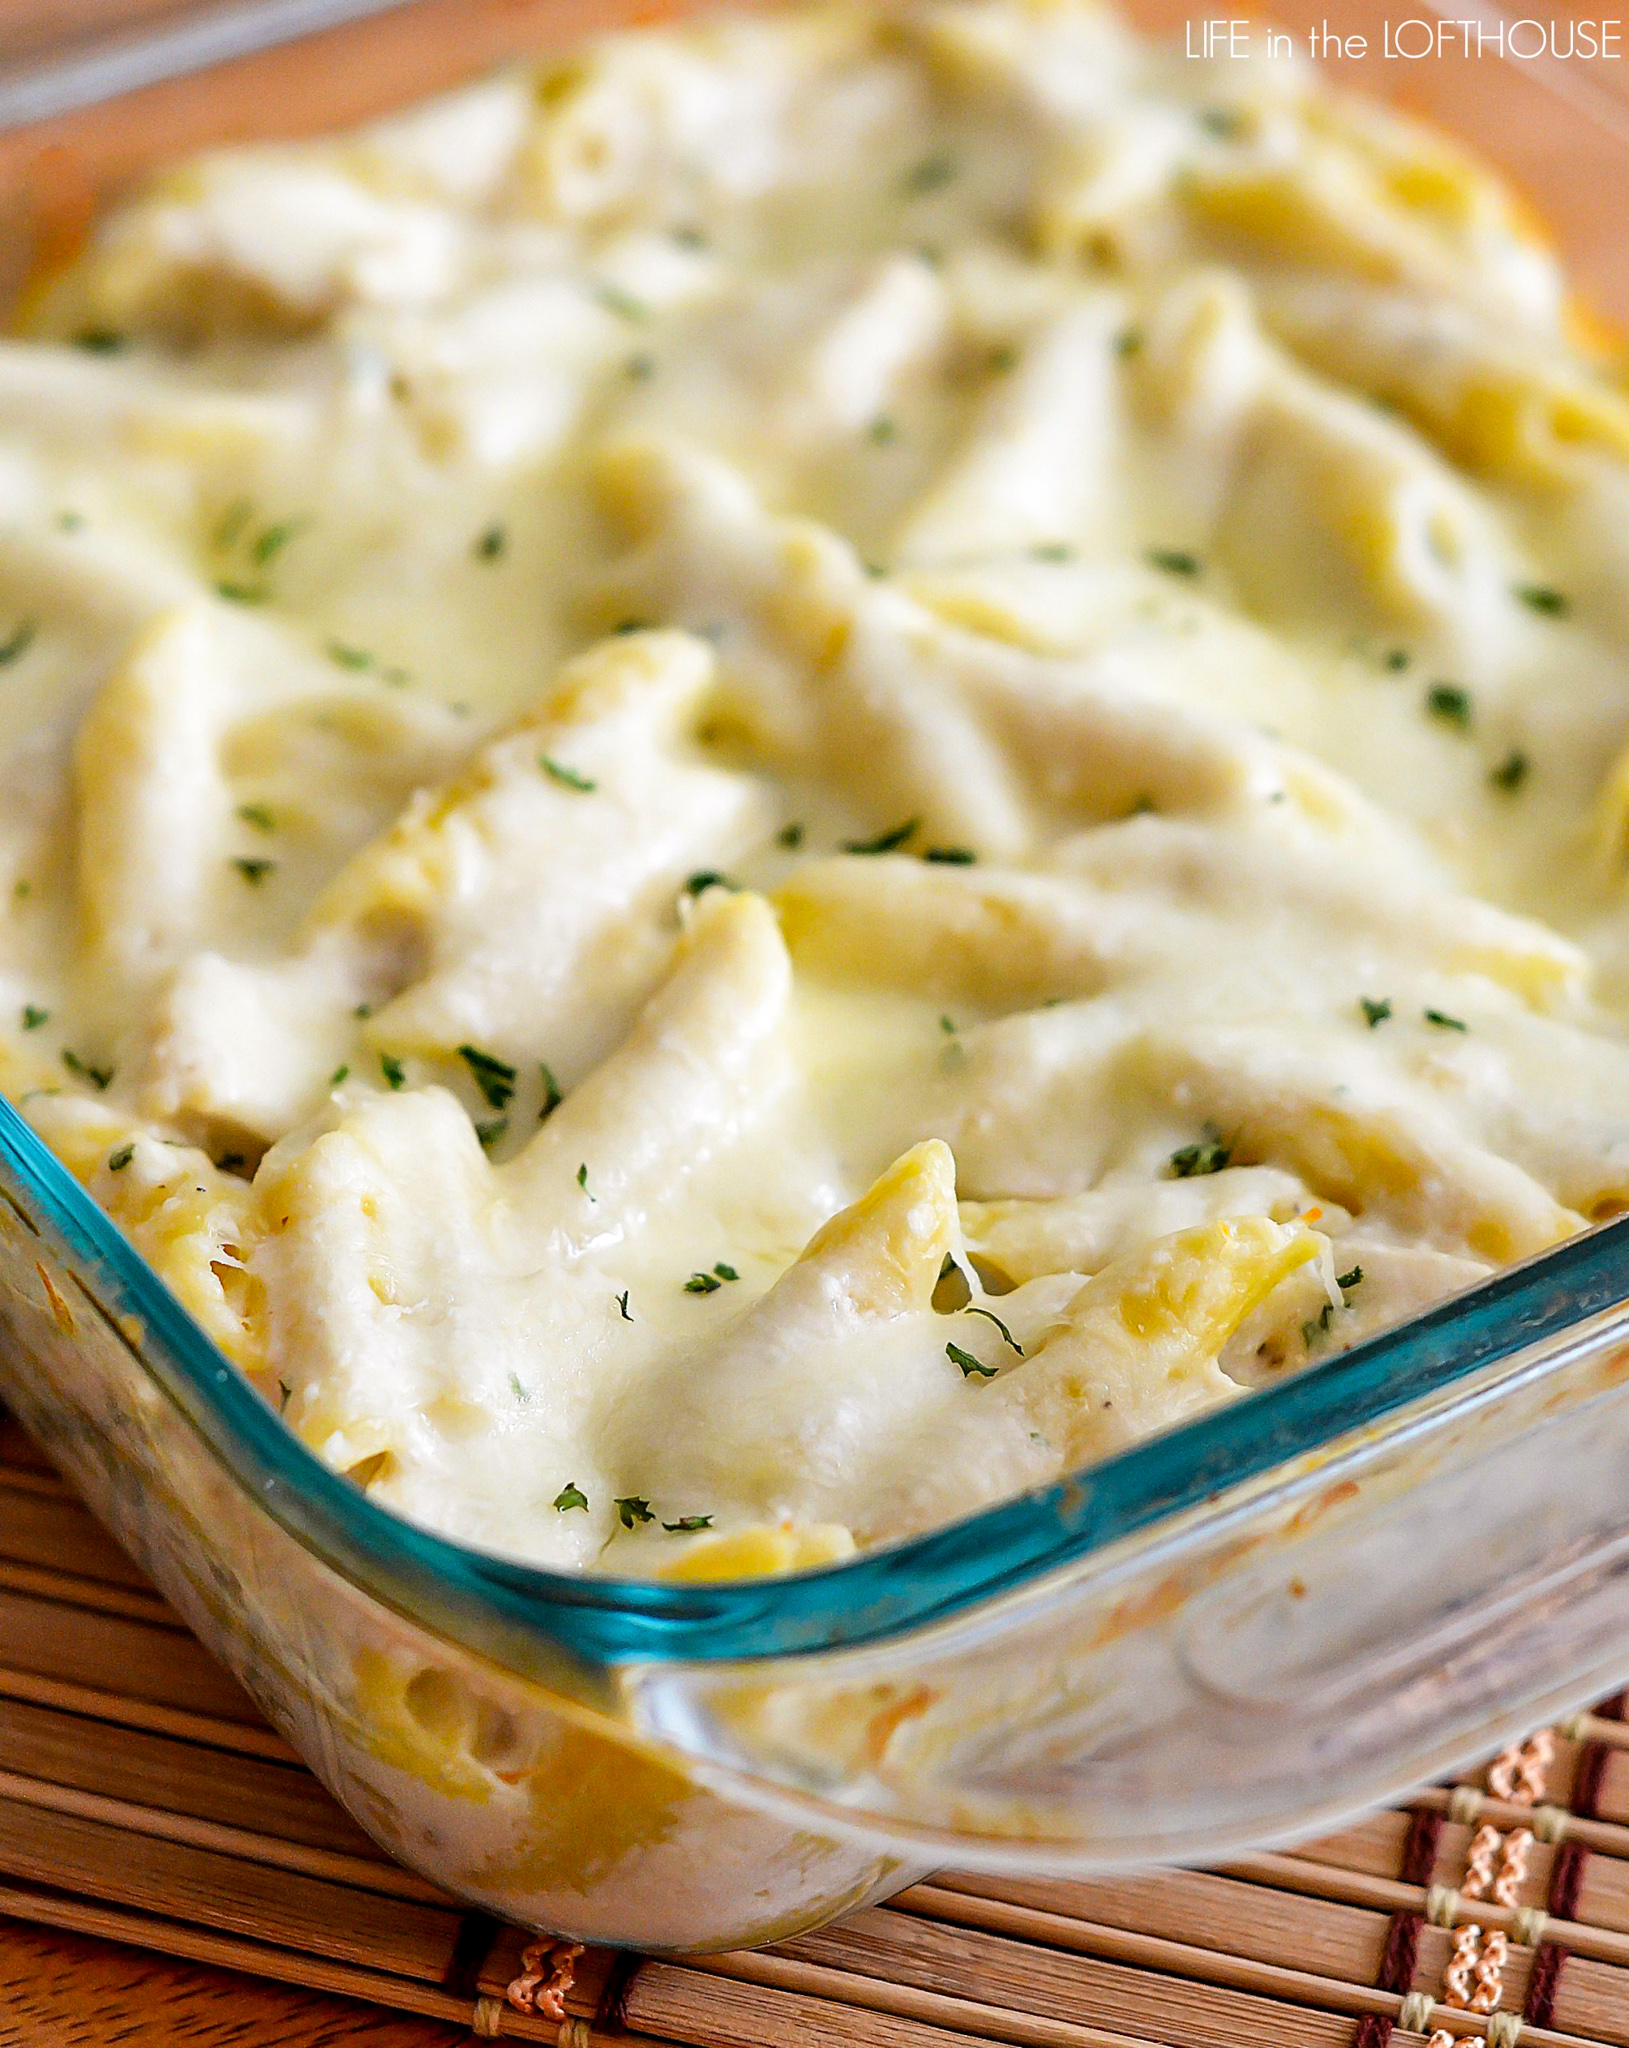 This Three Cheese Chicken Alfredo Bake is cheesy, creamy heaven with Ricotta, Parmesan and Mozzarella cheese. Life-in-the-Lofthouse.com